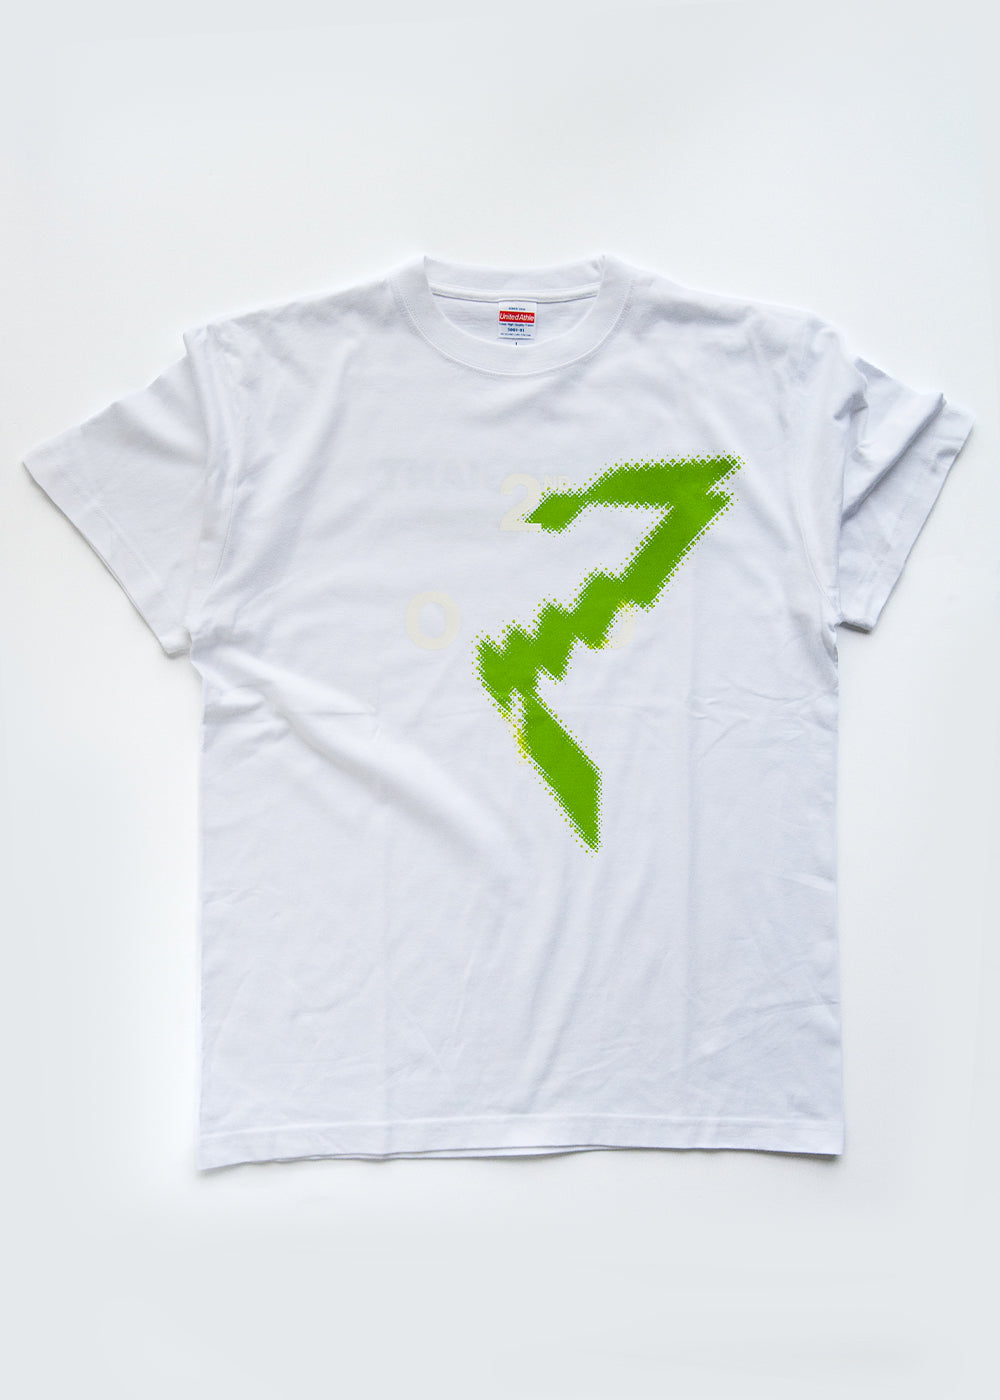 SUPERGIANT™ 2ND ODYSSEY T-SHIRT WHITE